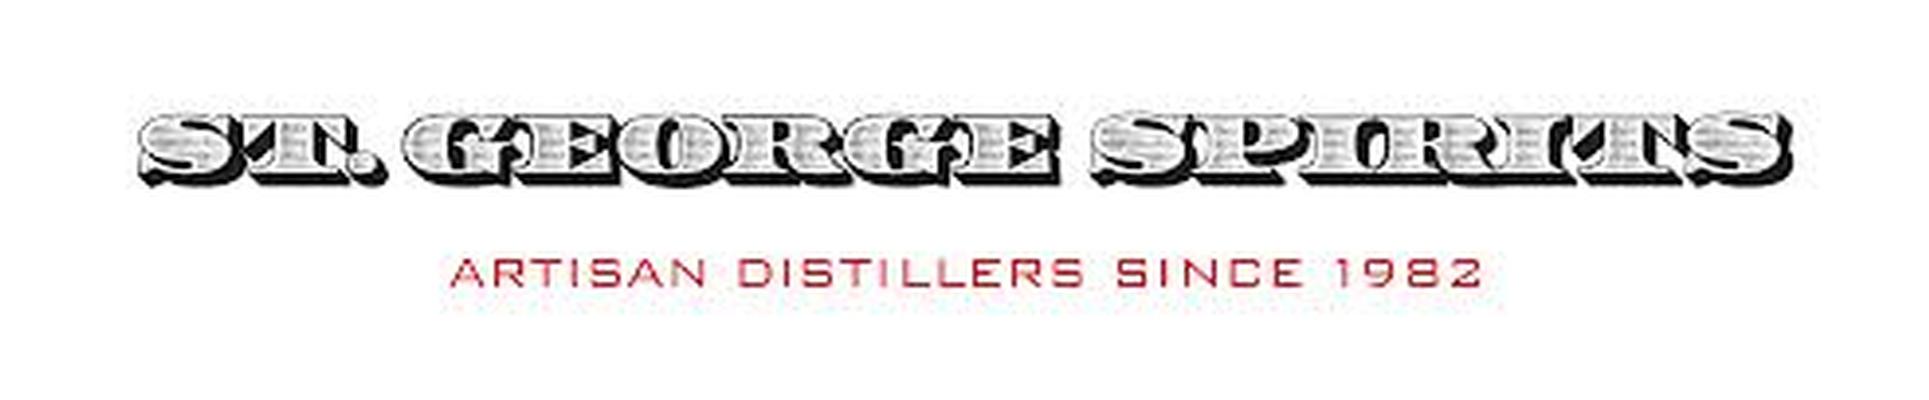 Advanced Training Tour & Tasting for 4 People at St. George Spirits